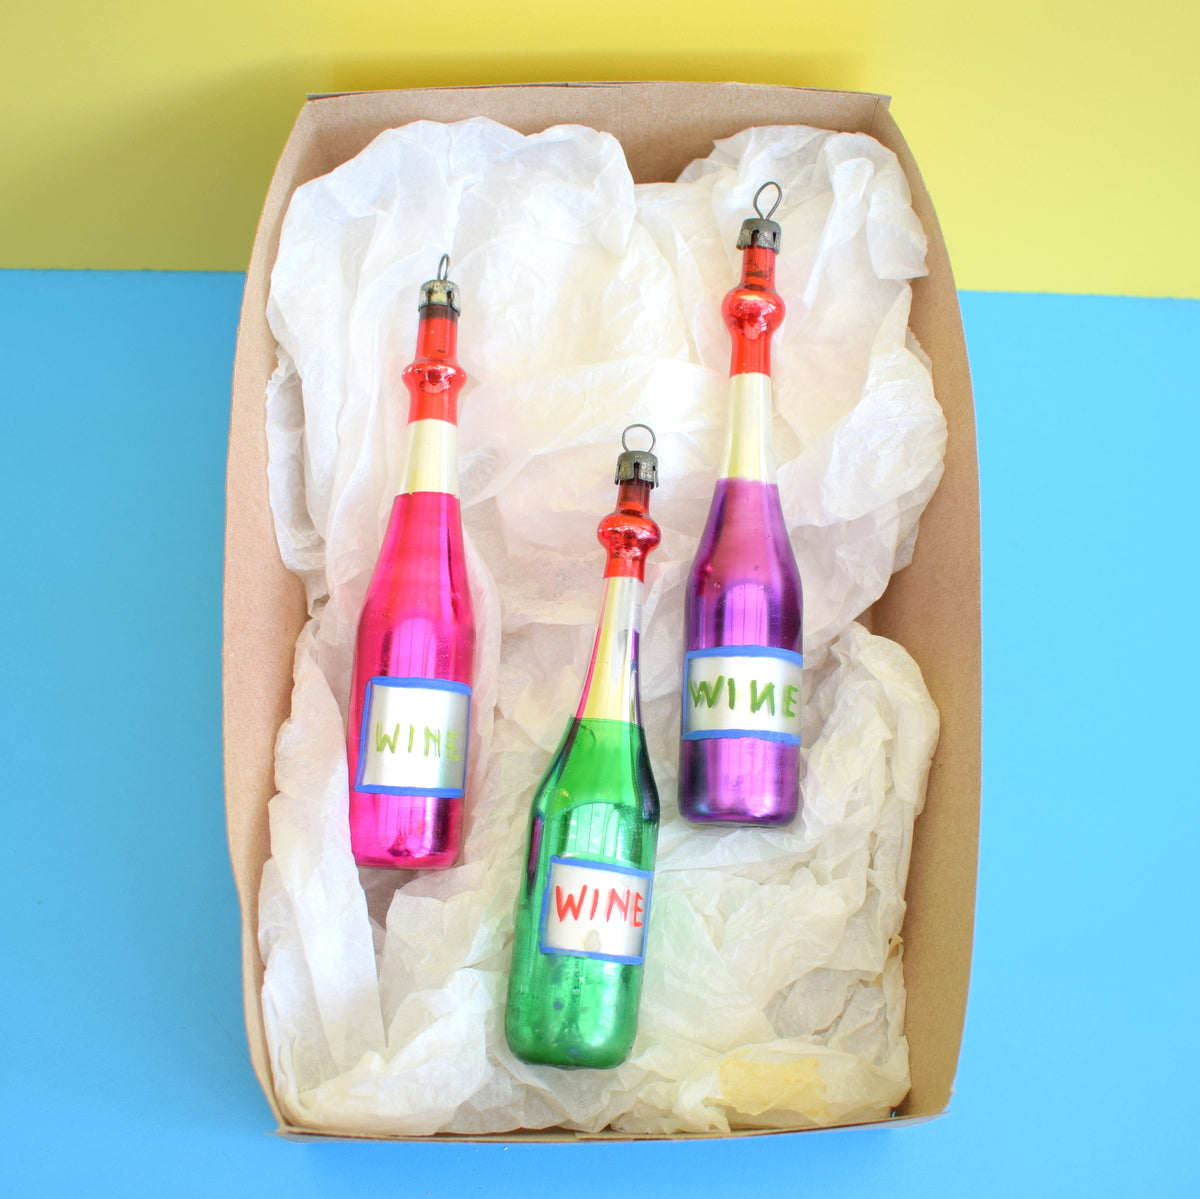 Vintage 1950s Rare Glass Christmas Decorations x3 - Wine Bottles - Pink, Green & Purple - Boxed